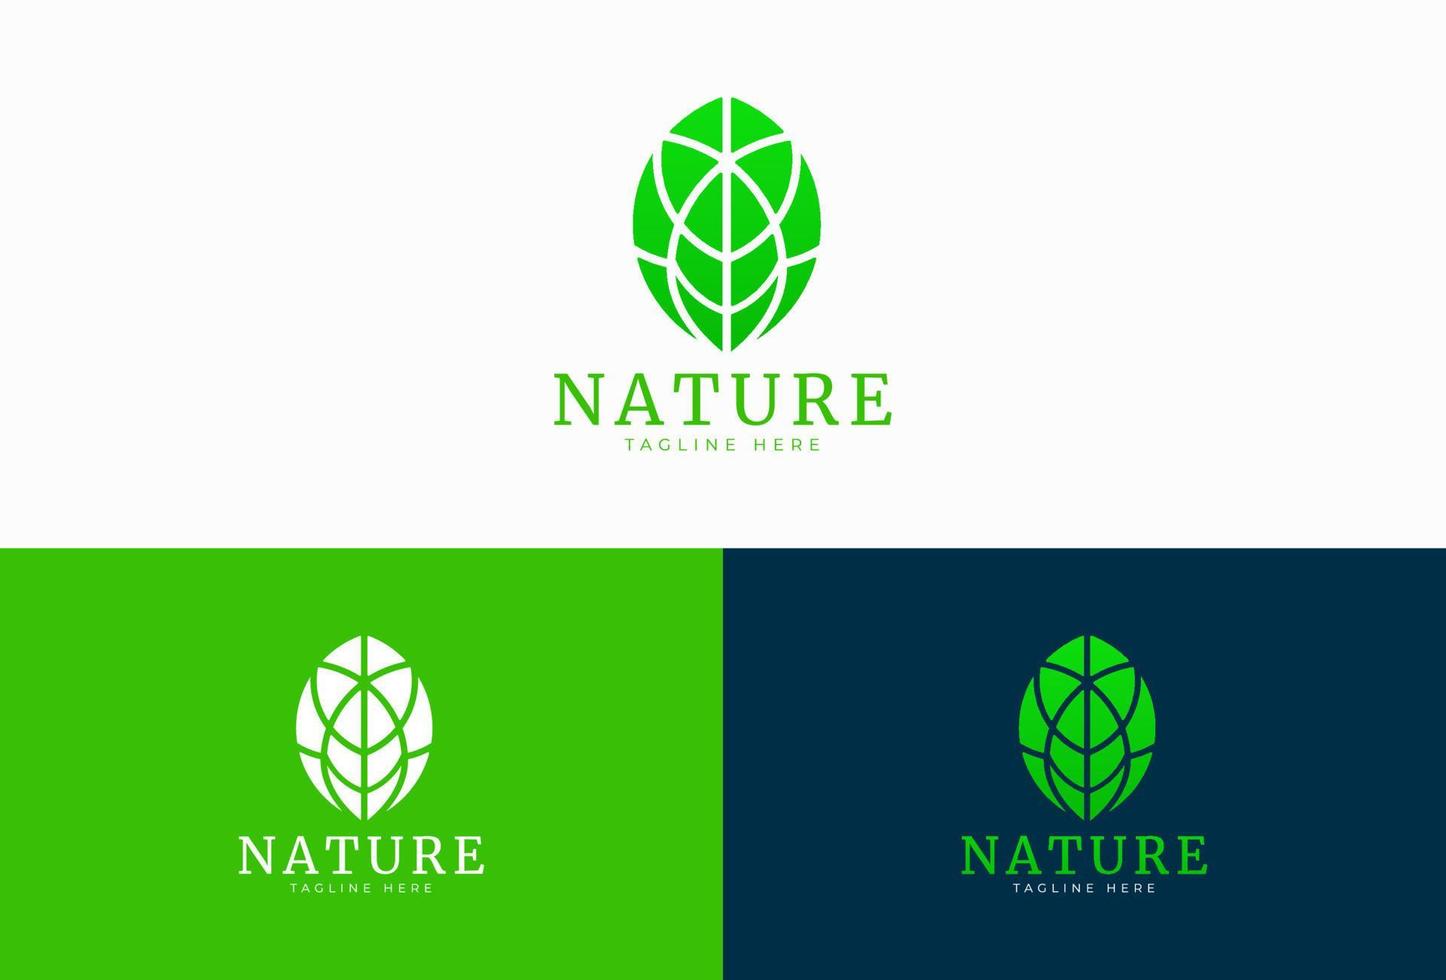 Nature Logo Design with green color, can be used as a symbol, brand identity, company logo, etc. vector